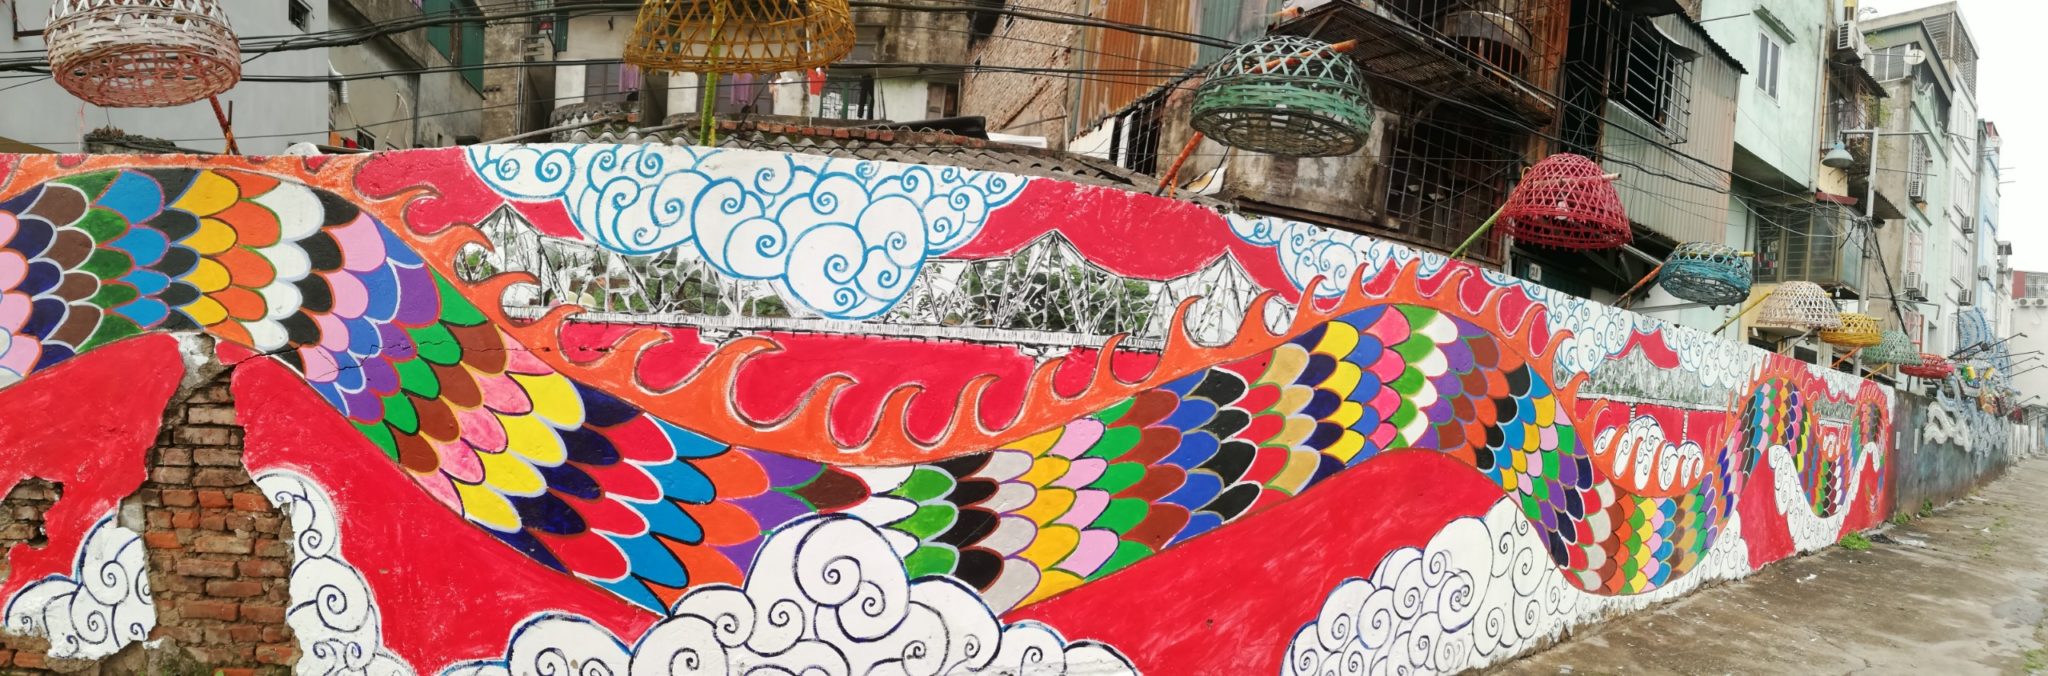 The road full of rubbish at the foot of Long Bien Bridge suddenly turns into colorful artwork